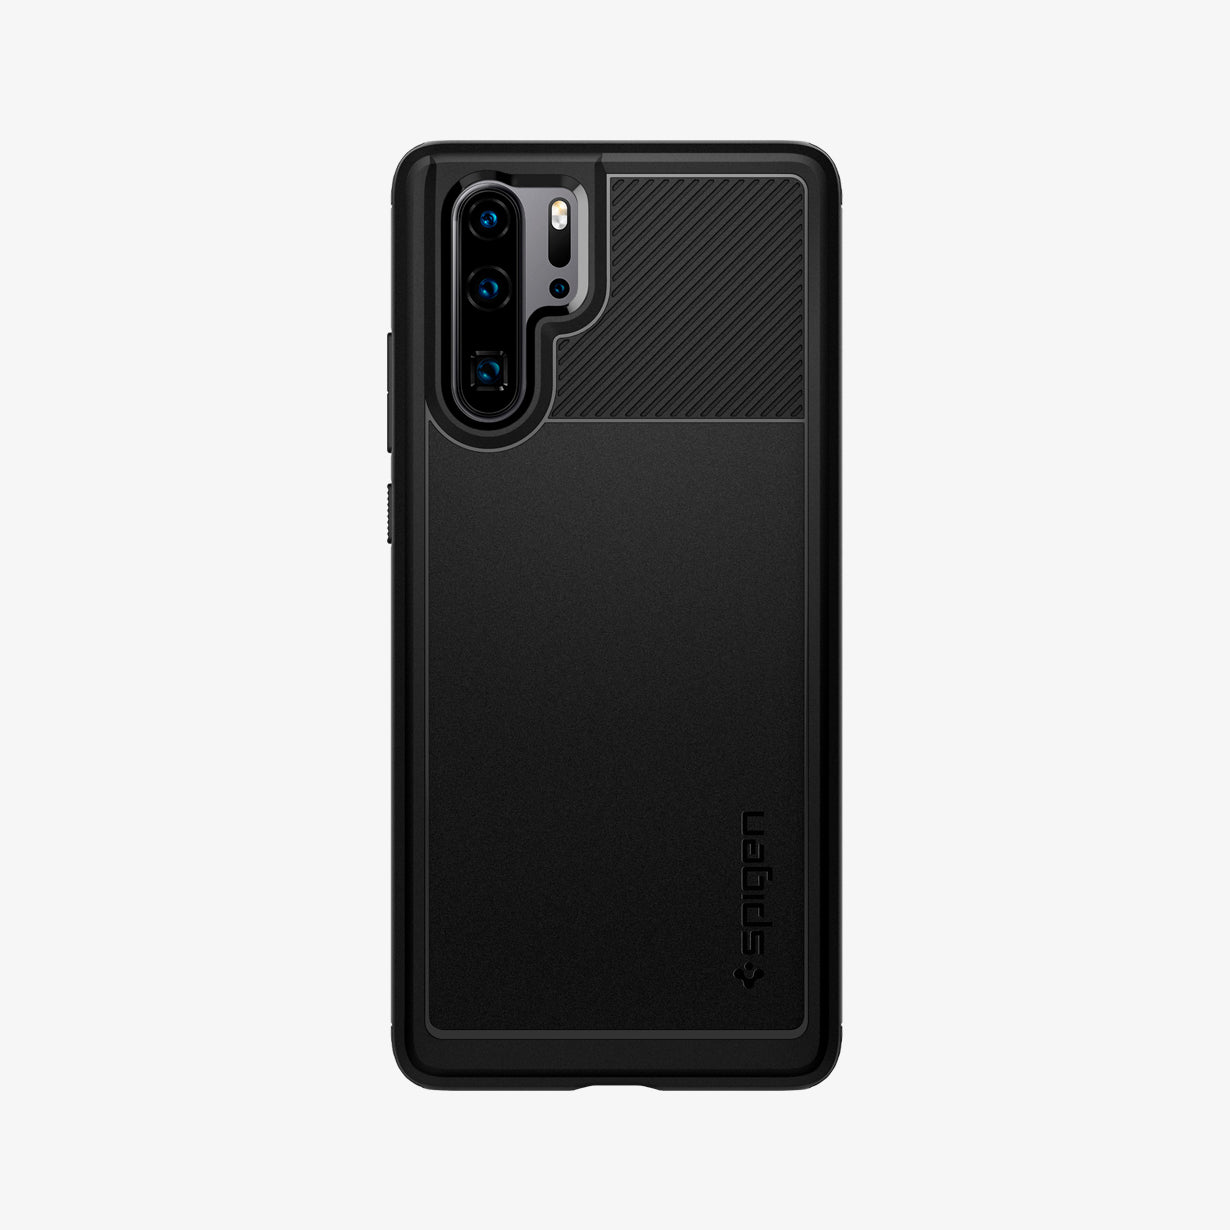 L37CS25725 - Huawei P30 Pro Case Rugged Armor in black showing the back